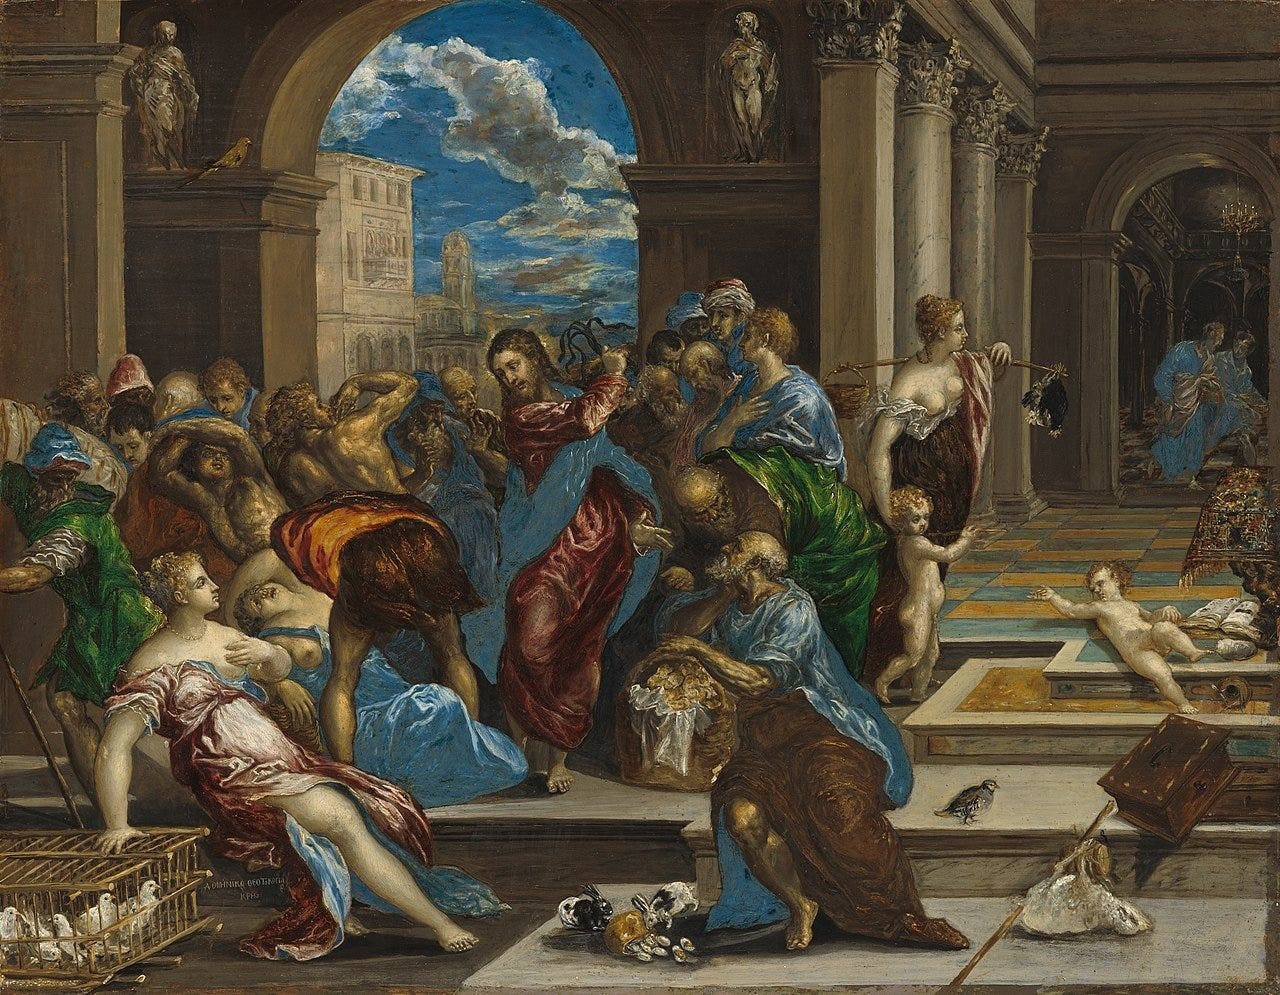 Christ Driving the Money Changers from the Temple by El Greco.